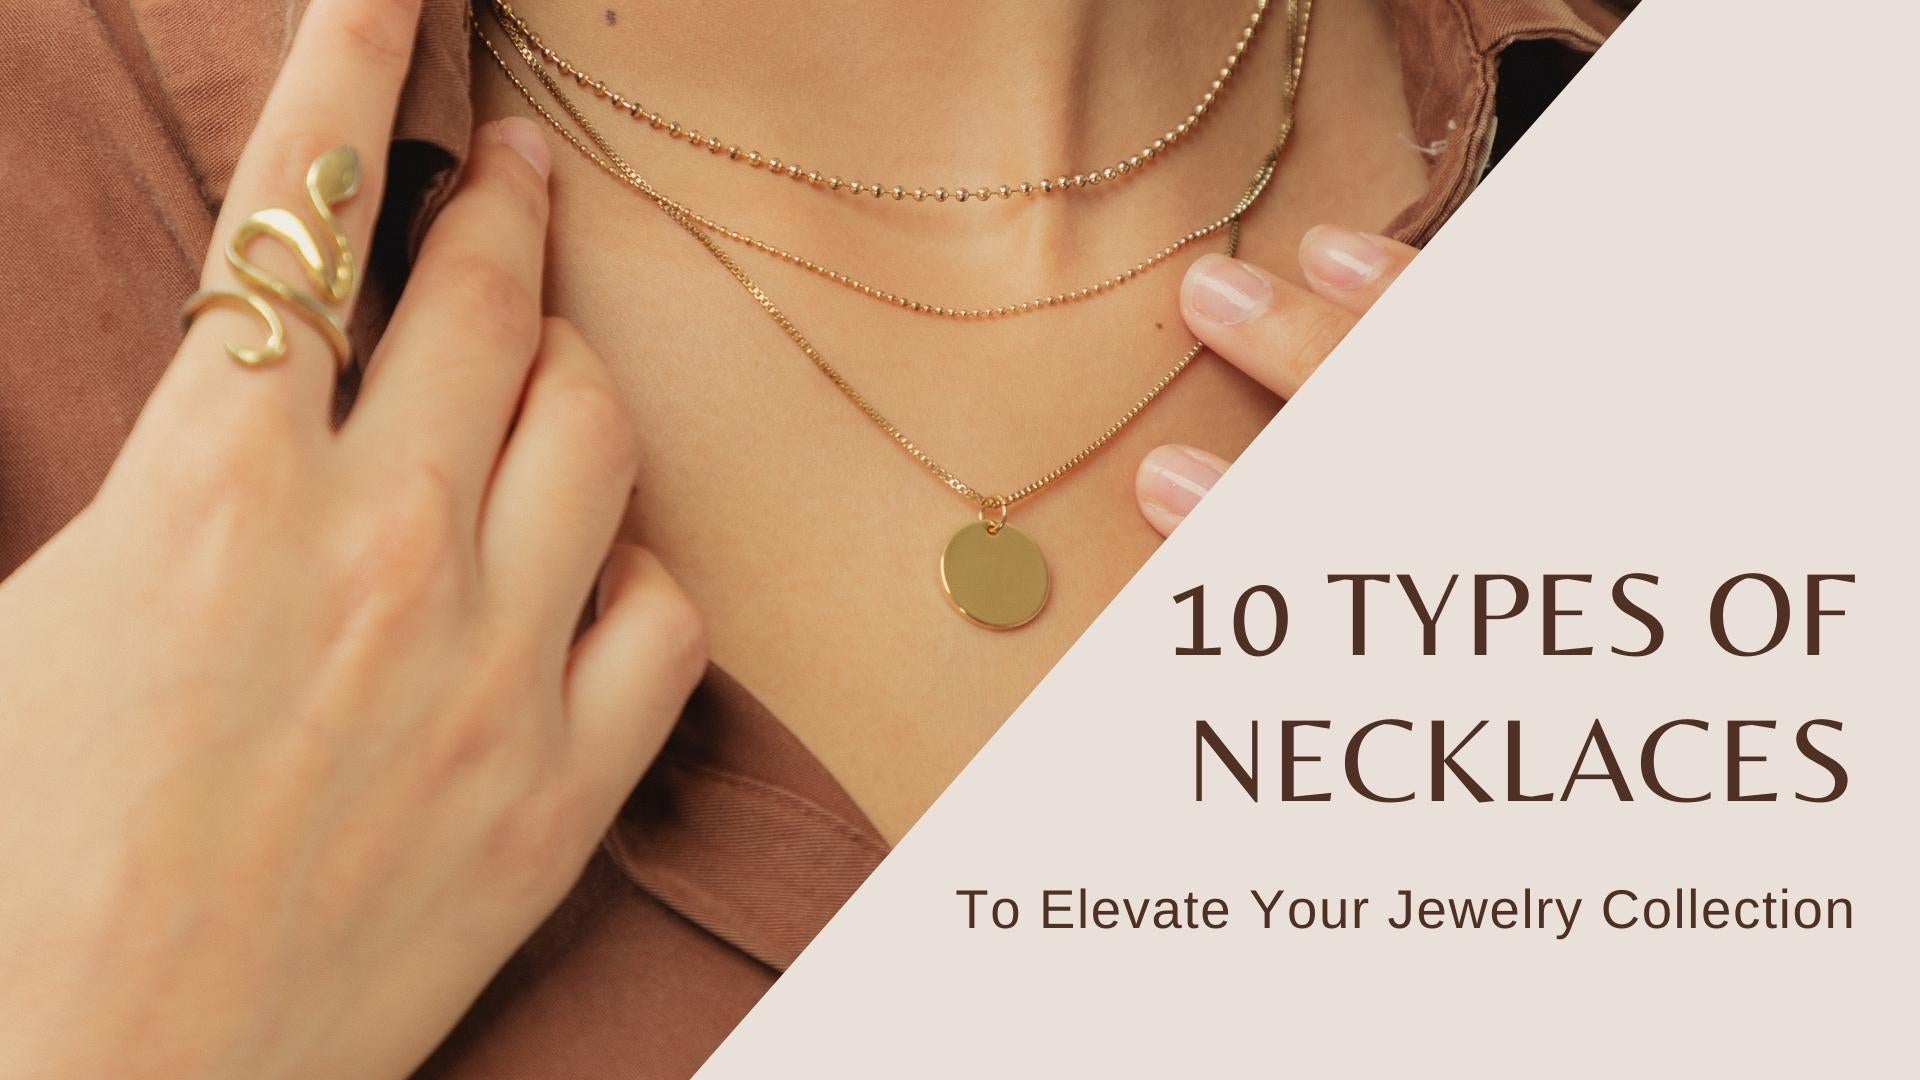 10 Types of Necklaces to Elevate Your Jewelry Collection - Nolabels.in